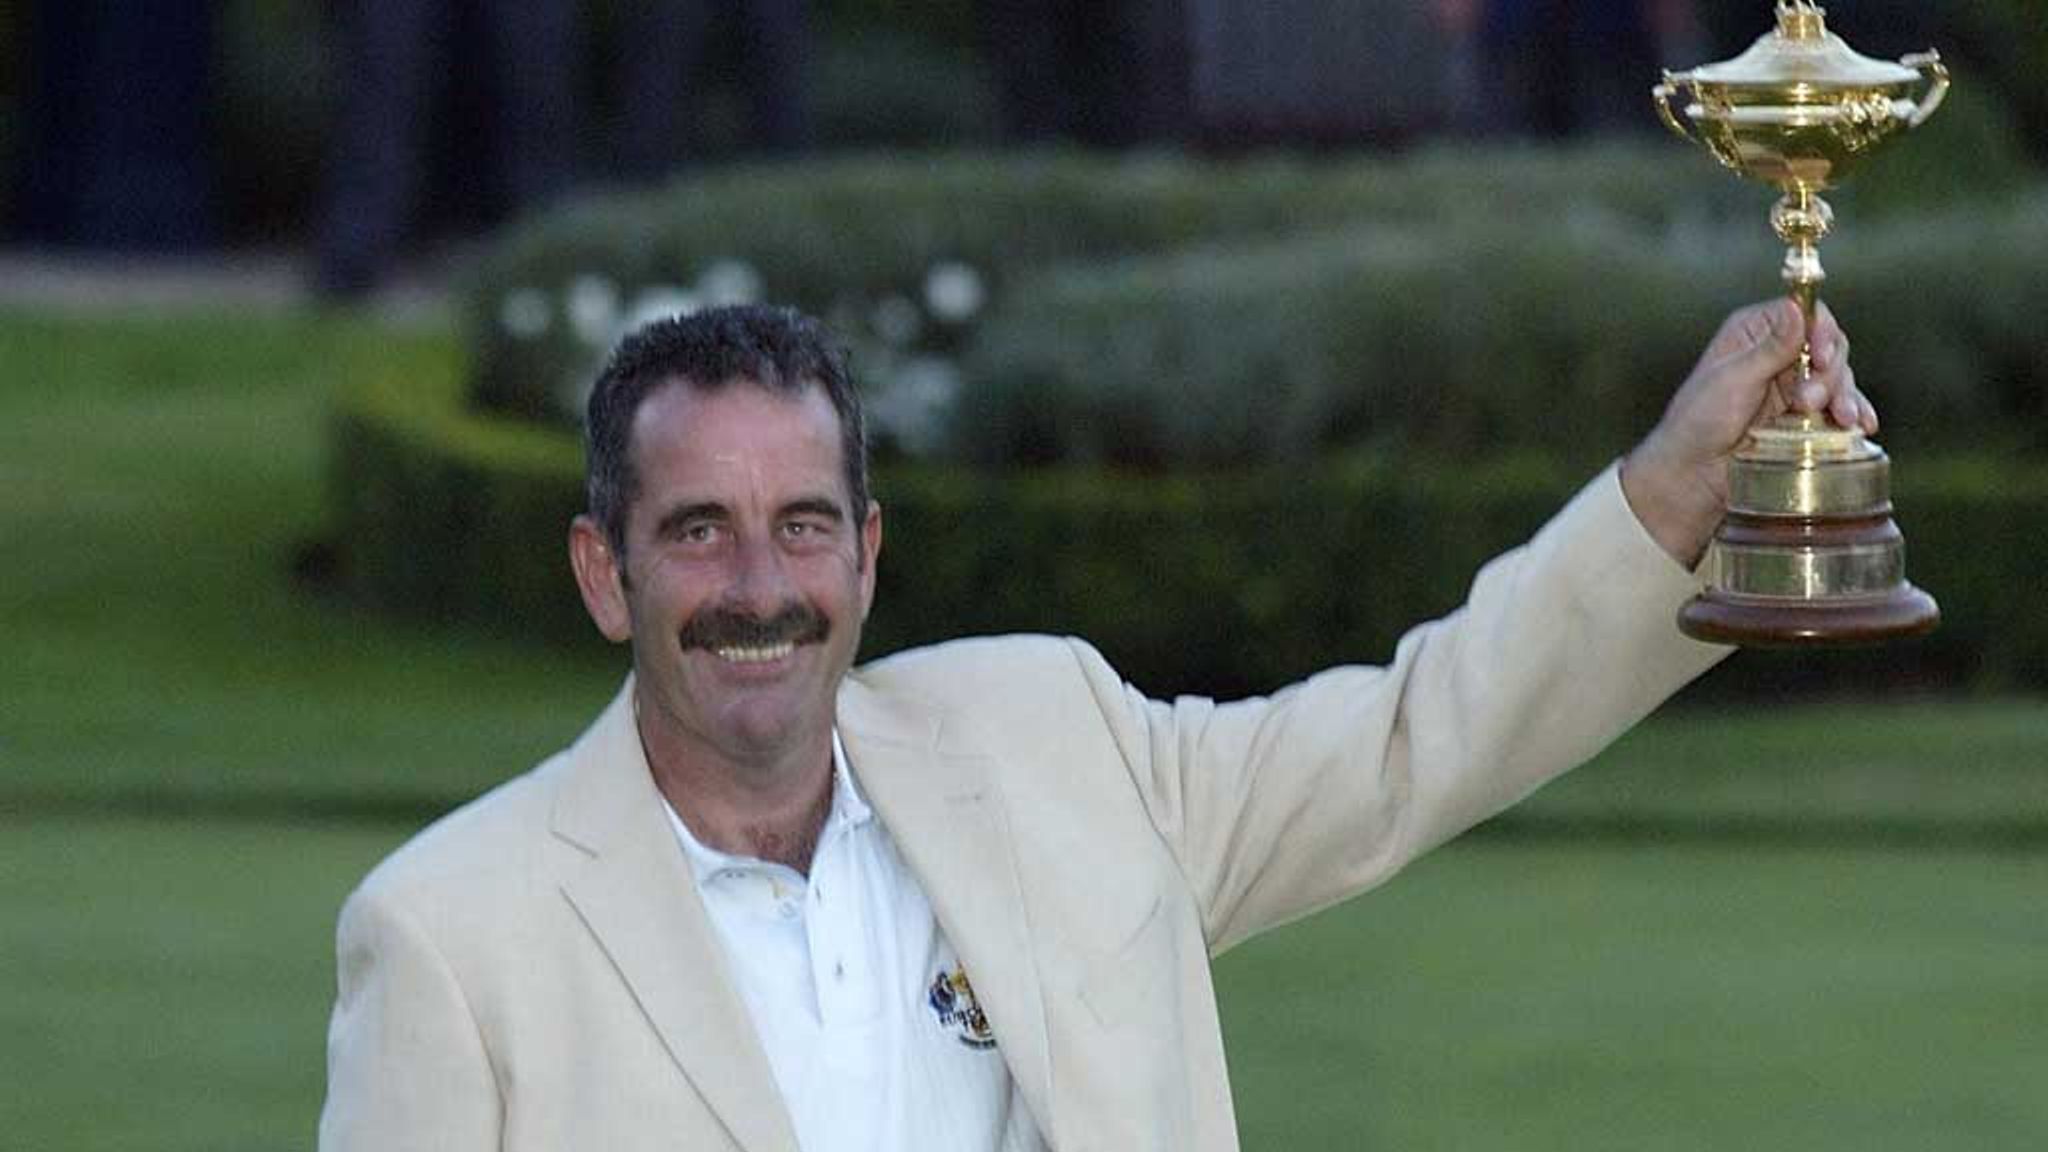 Sam Torrance explains he's quit golf after losing love for the sport